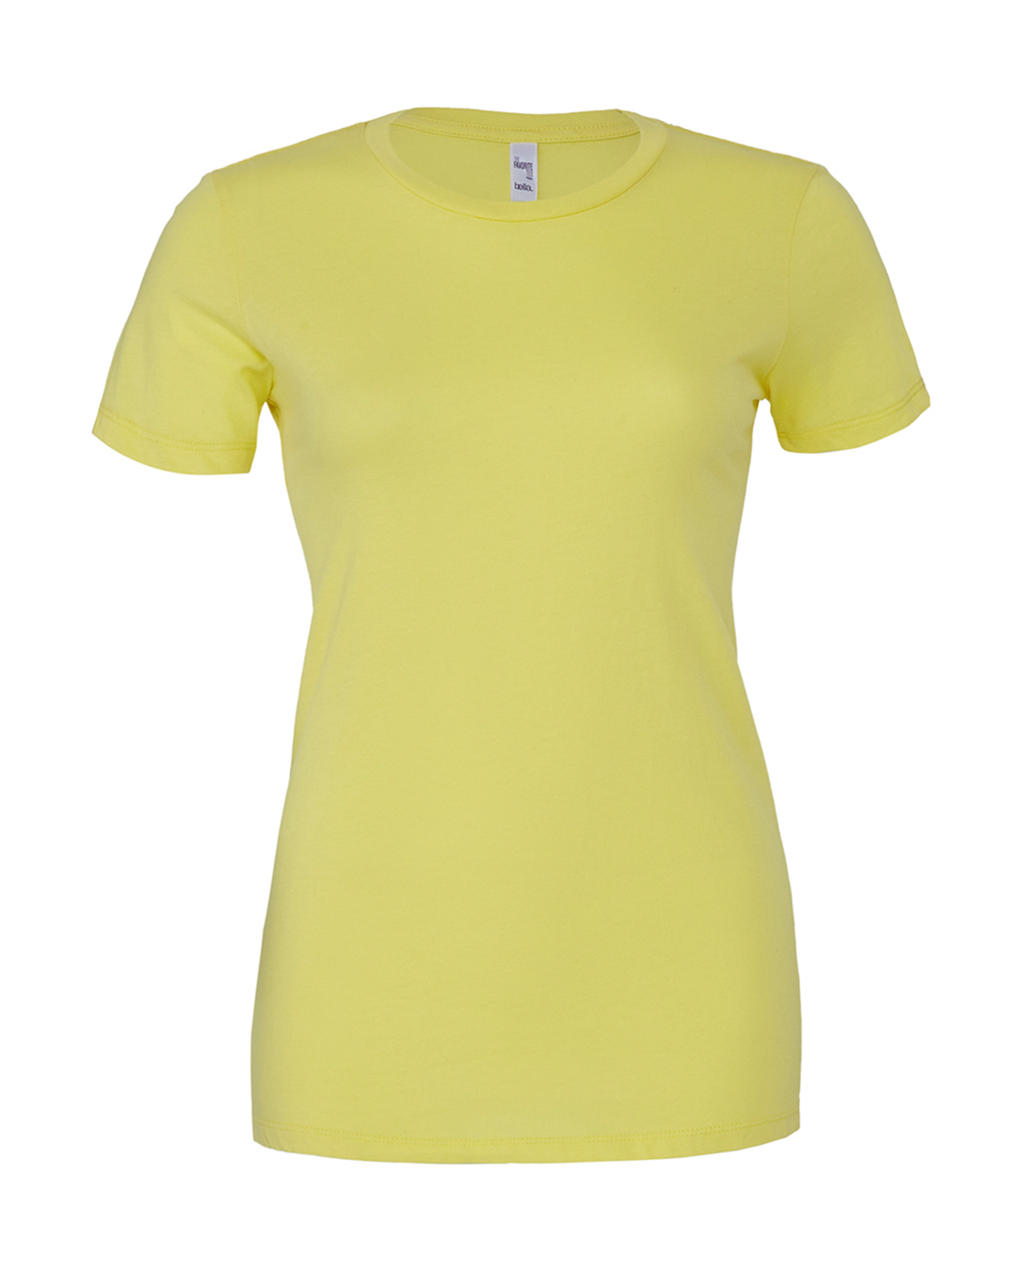  The Favorite T-Shirt in Farbe Yellow